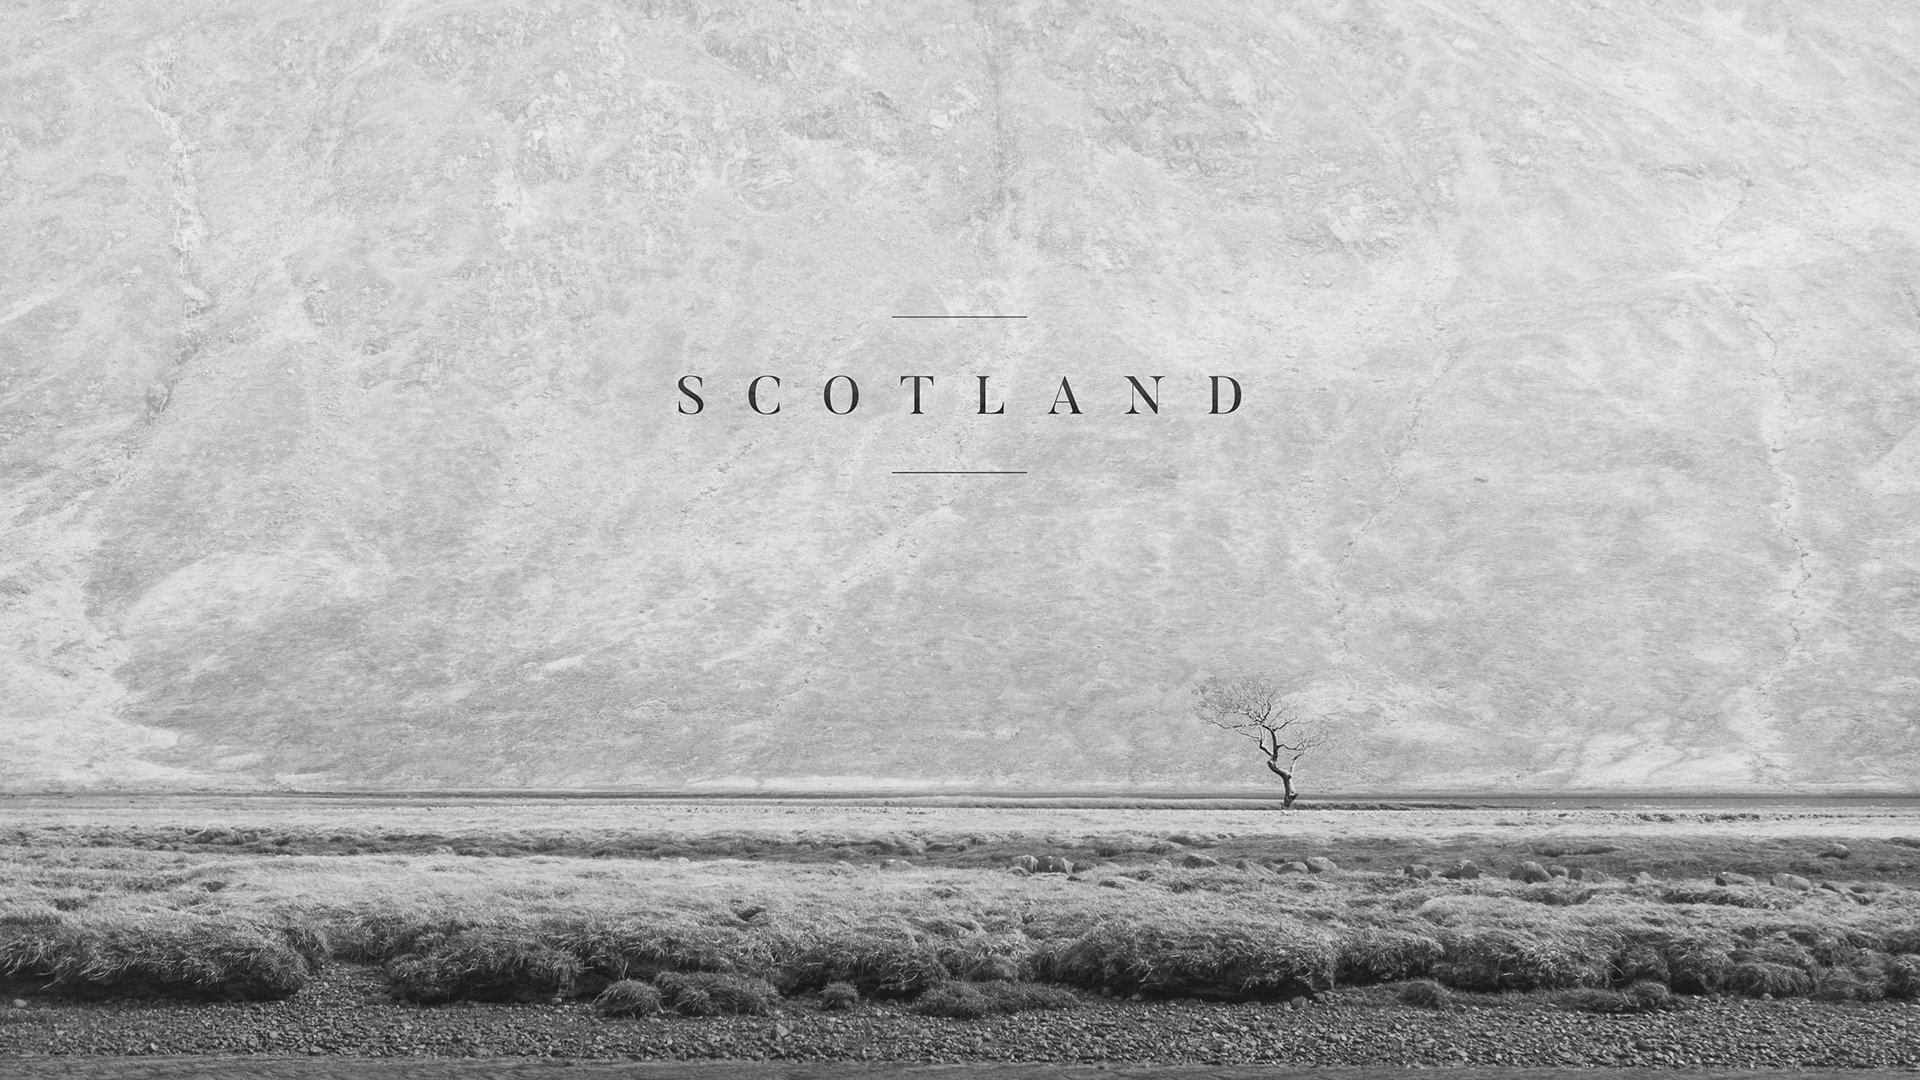 Philipp Apler Showcases the Beauty of Scotland in Moody Black and White